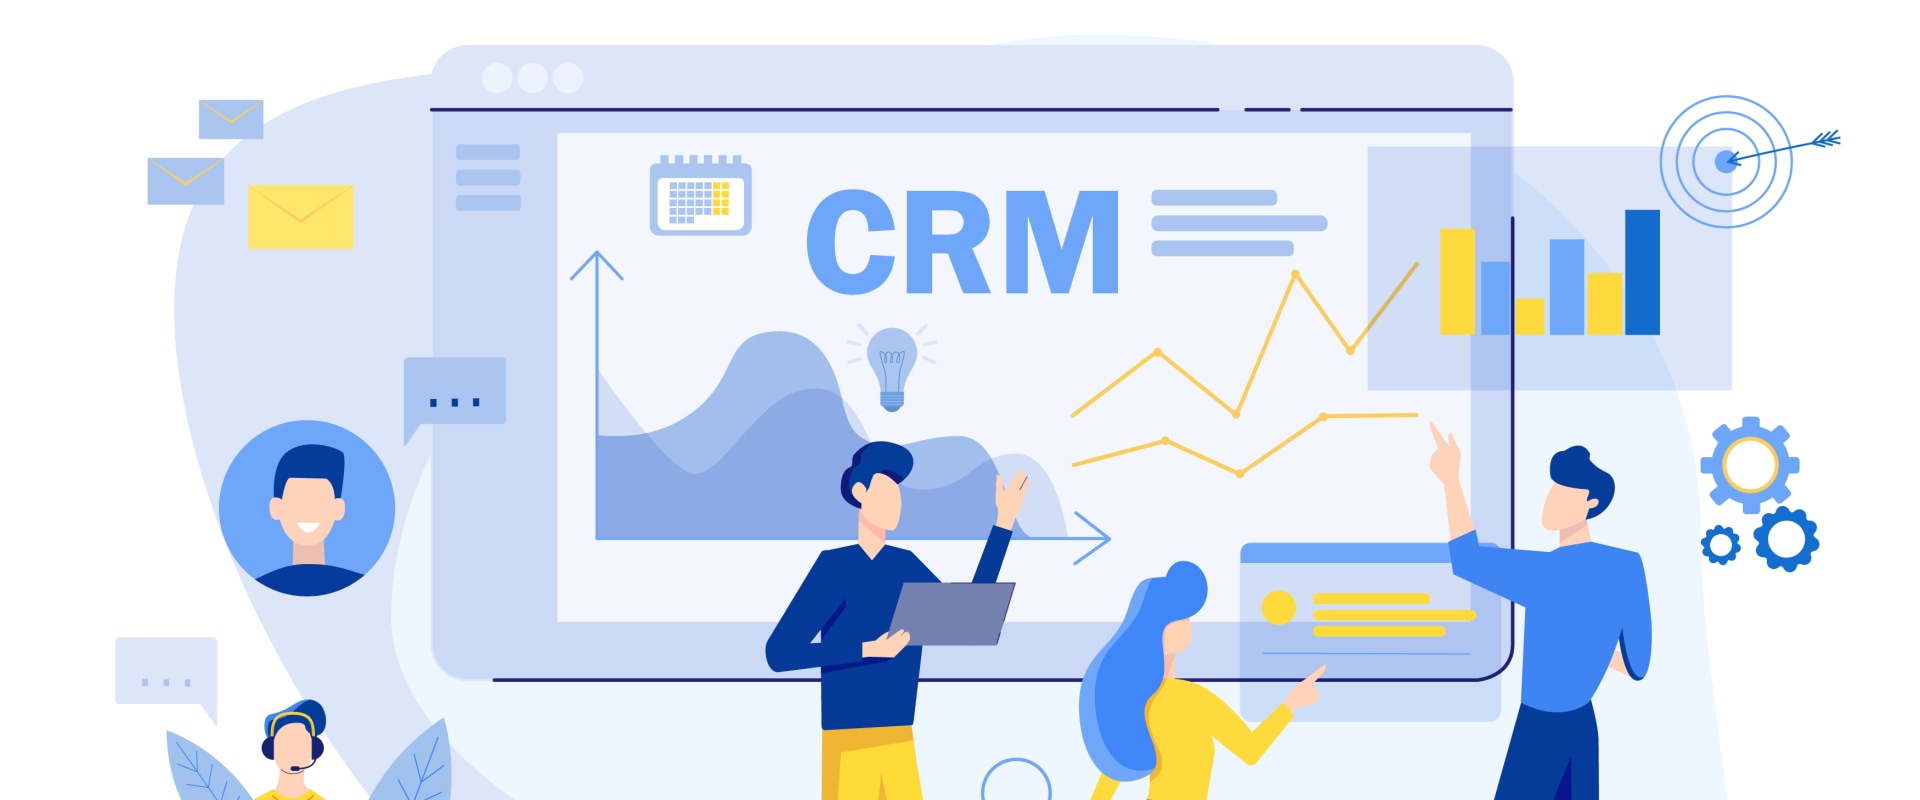 Training for Employees: How to Optimize Your CRM Strategy